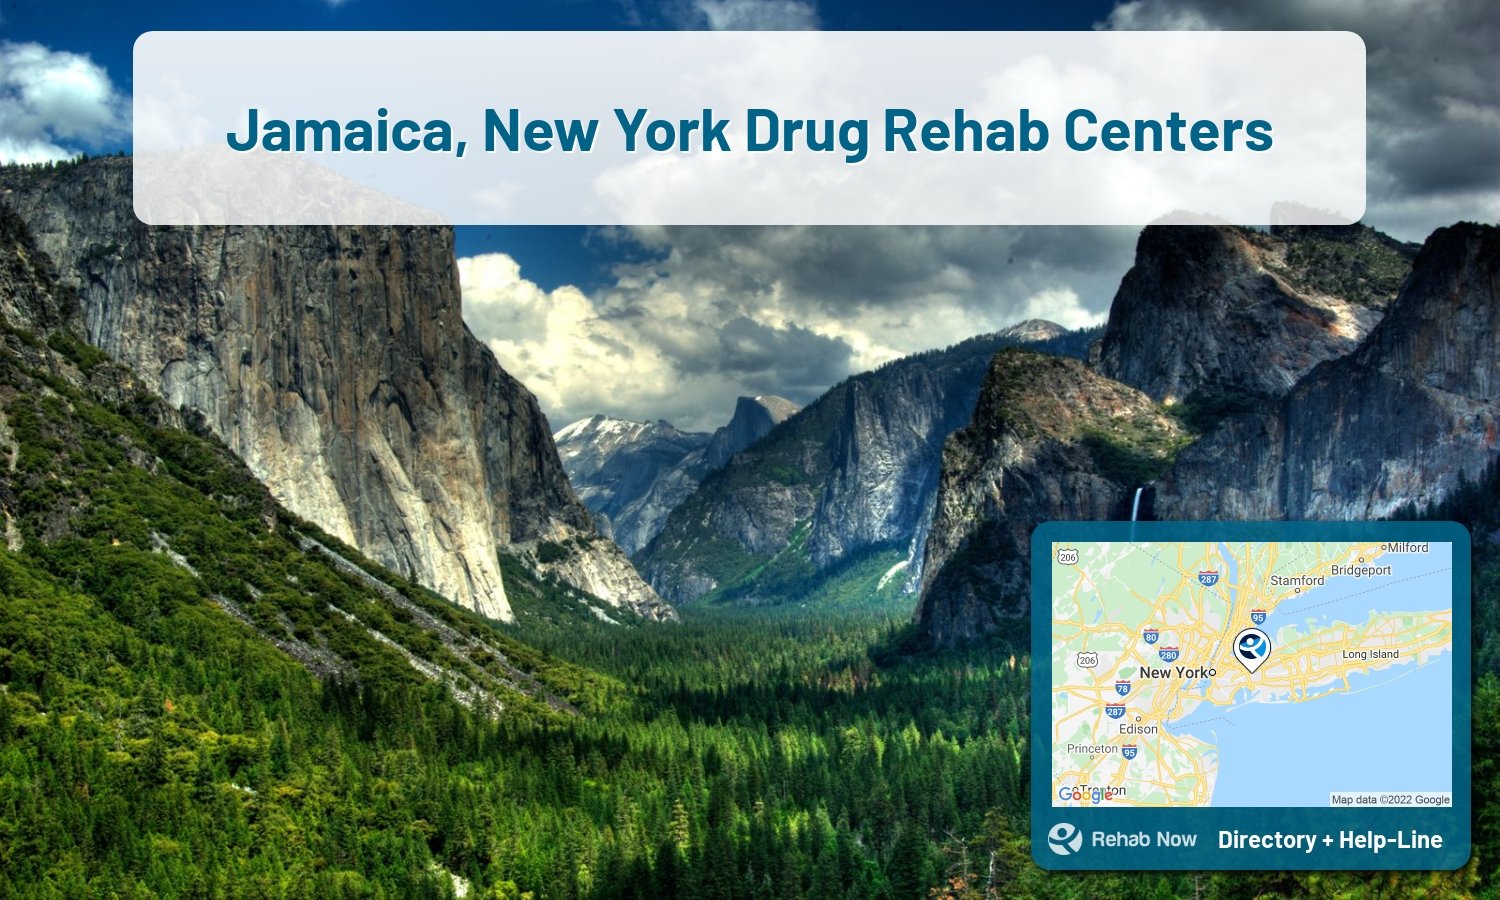 Ready to pick a rehab center in Jamaica? Get off alcohol, opiates, and other drugs, by selecting top drug rehab centers in New York